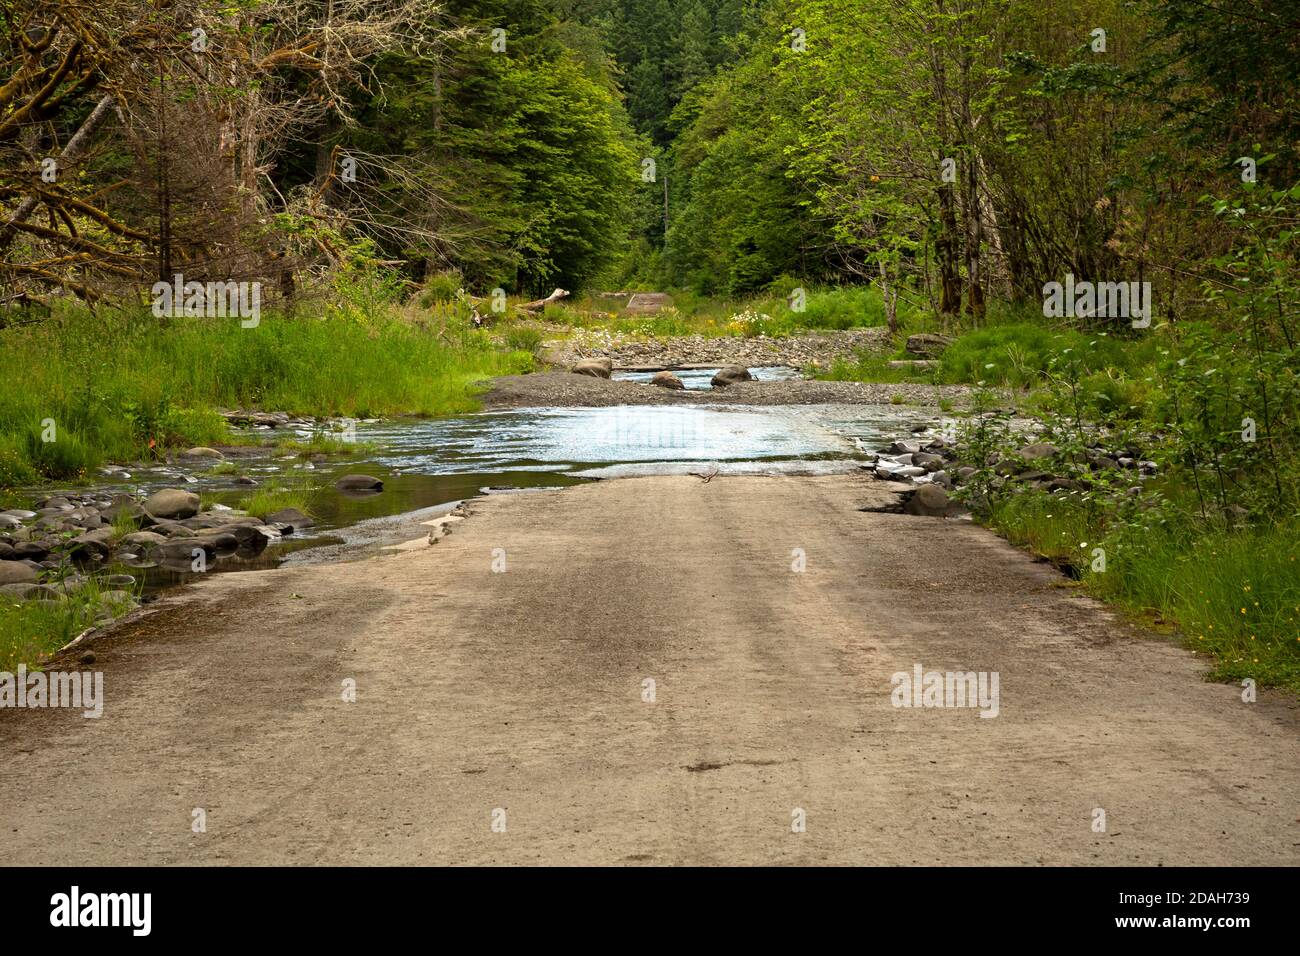 WA18023-00...WASHINGTON - The Elwha River Road flooded by the Elwah River when released from the Glines Canyon Dam in 2012, in Olympic National Park. Stock Photo